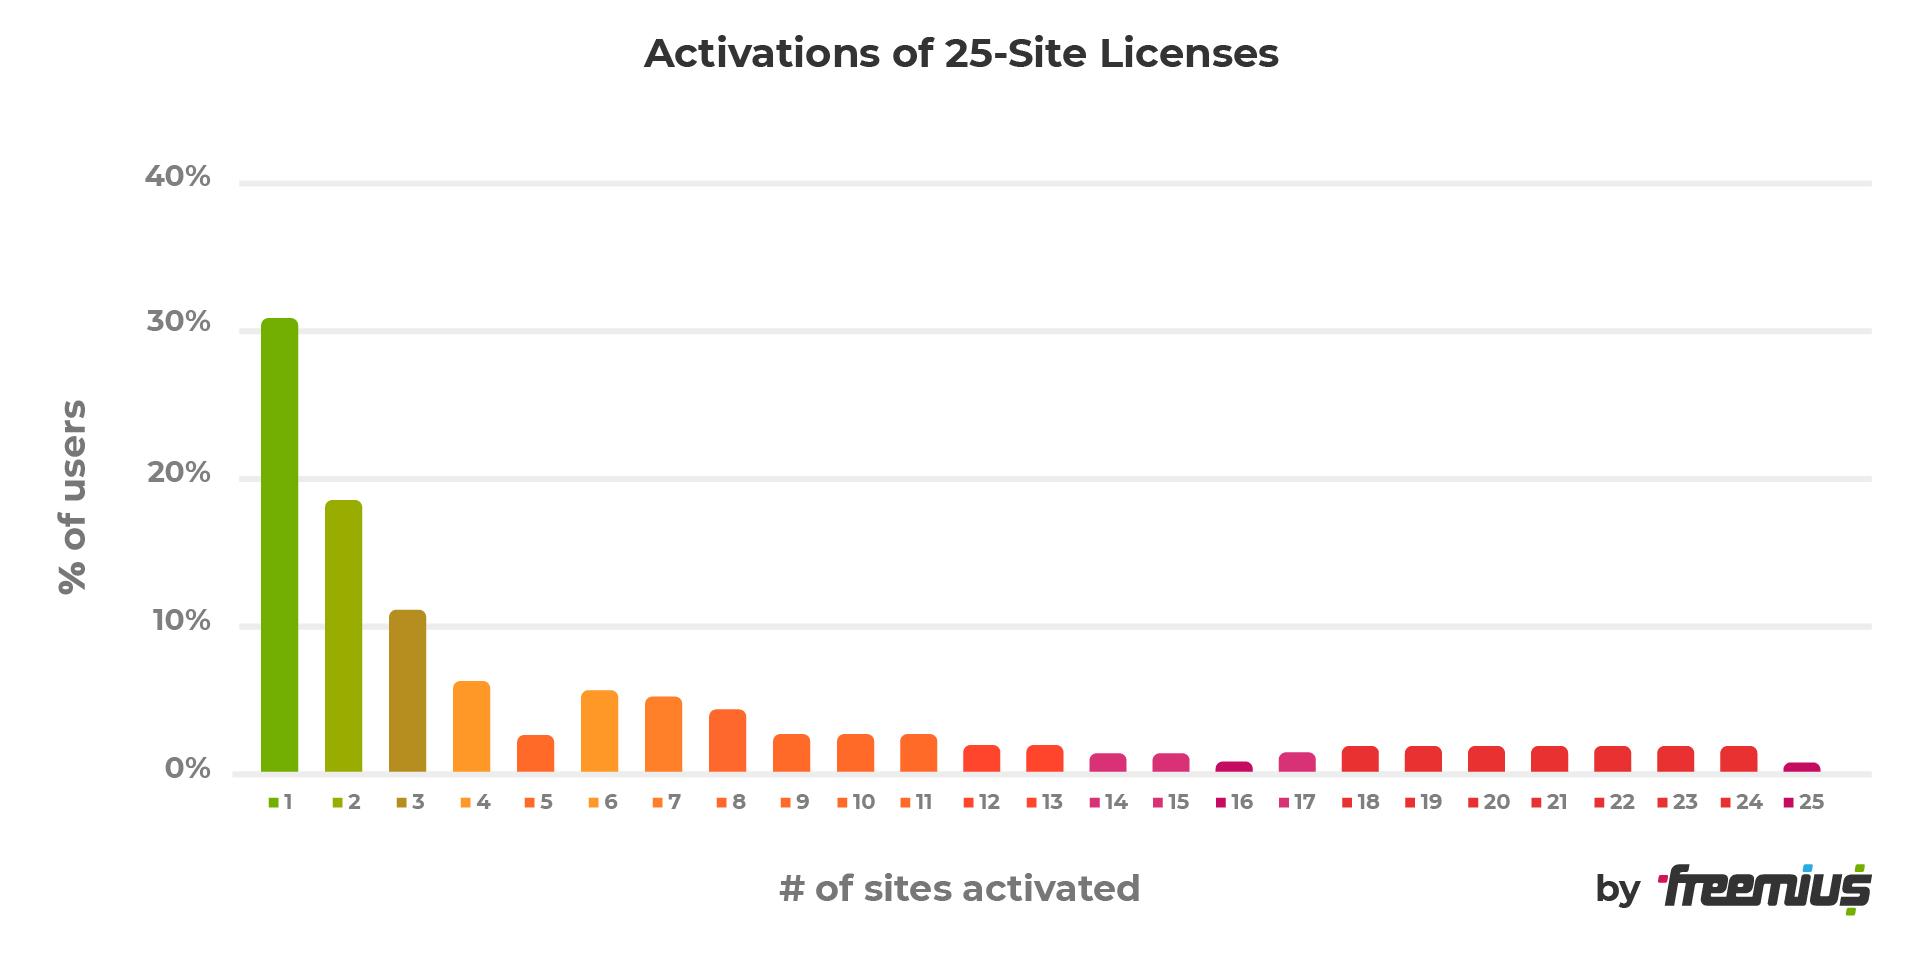 Activations of 25-site licenses